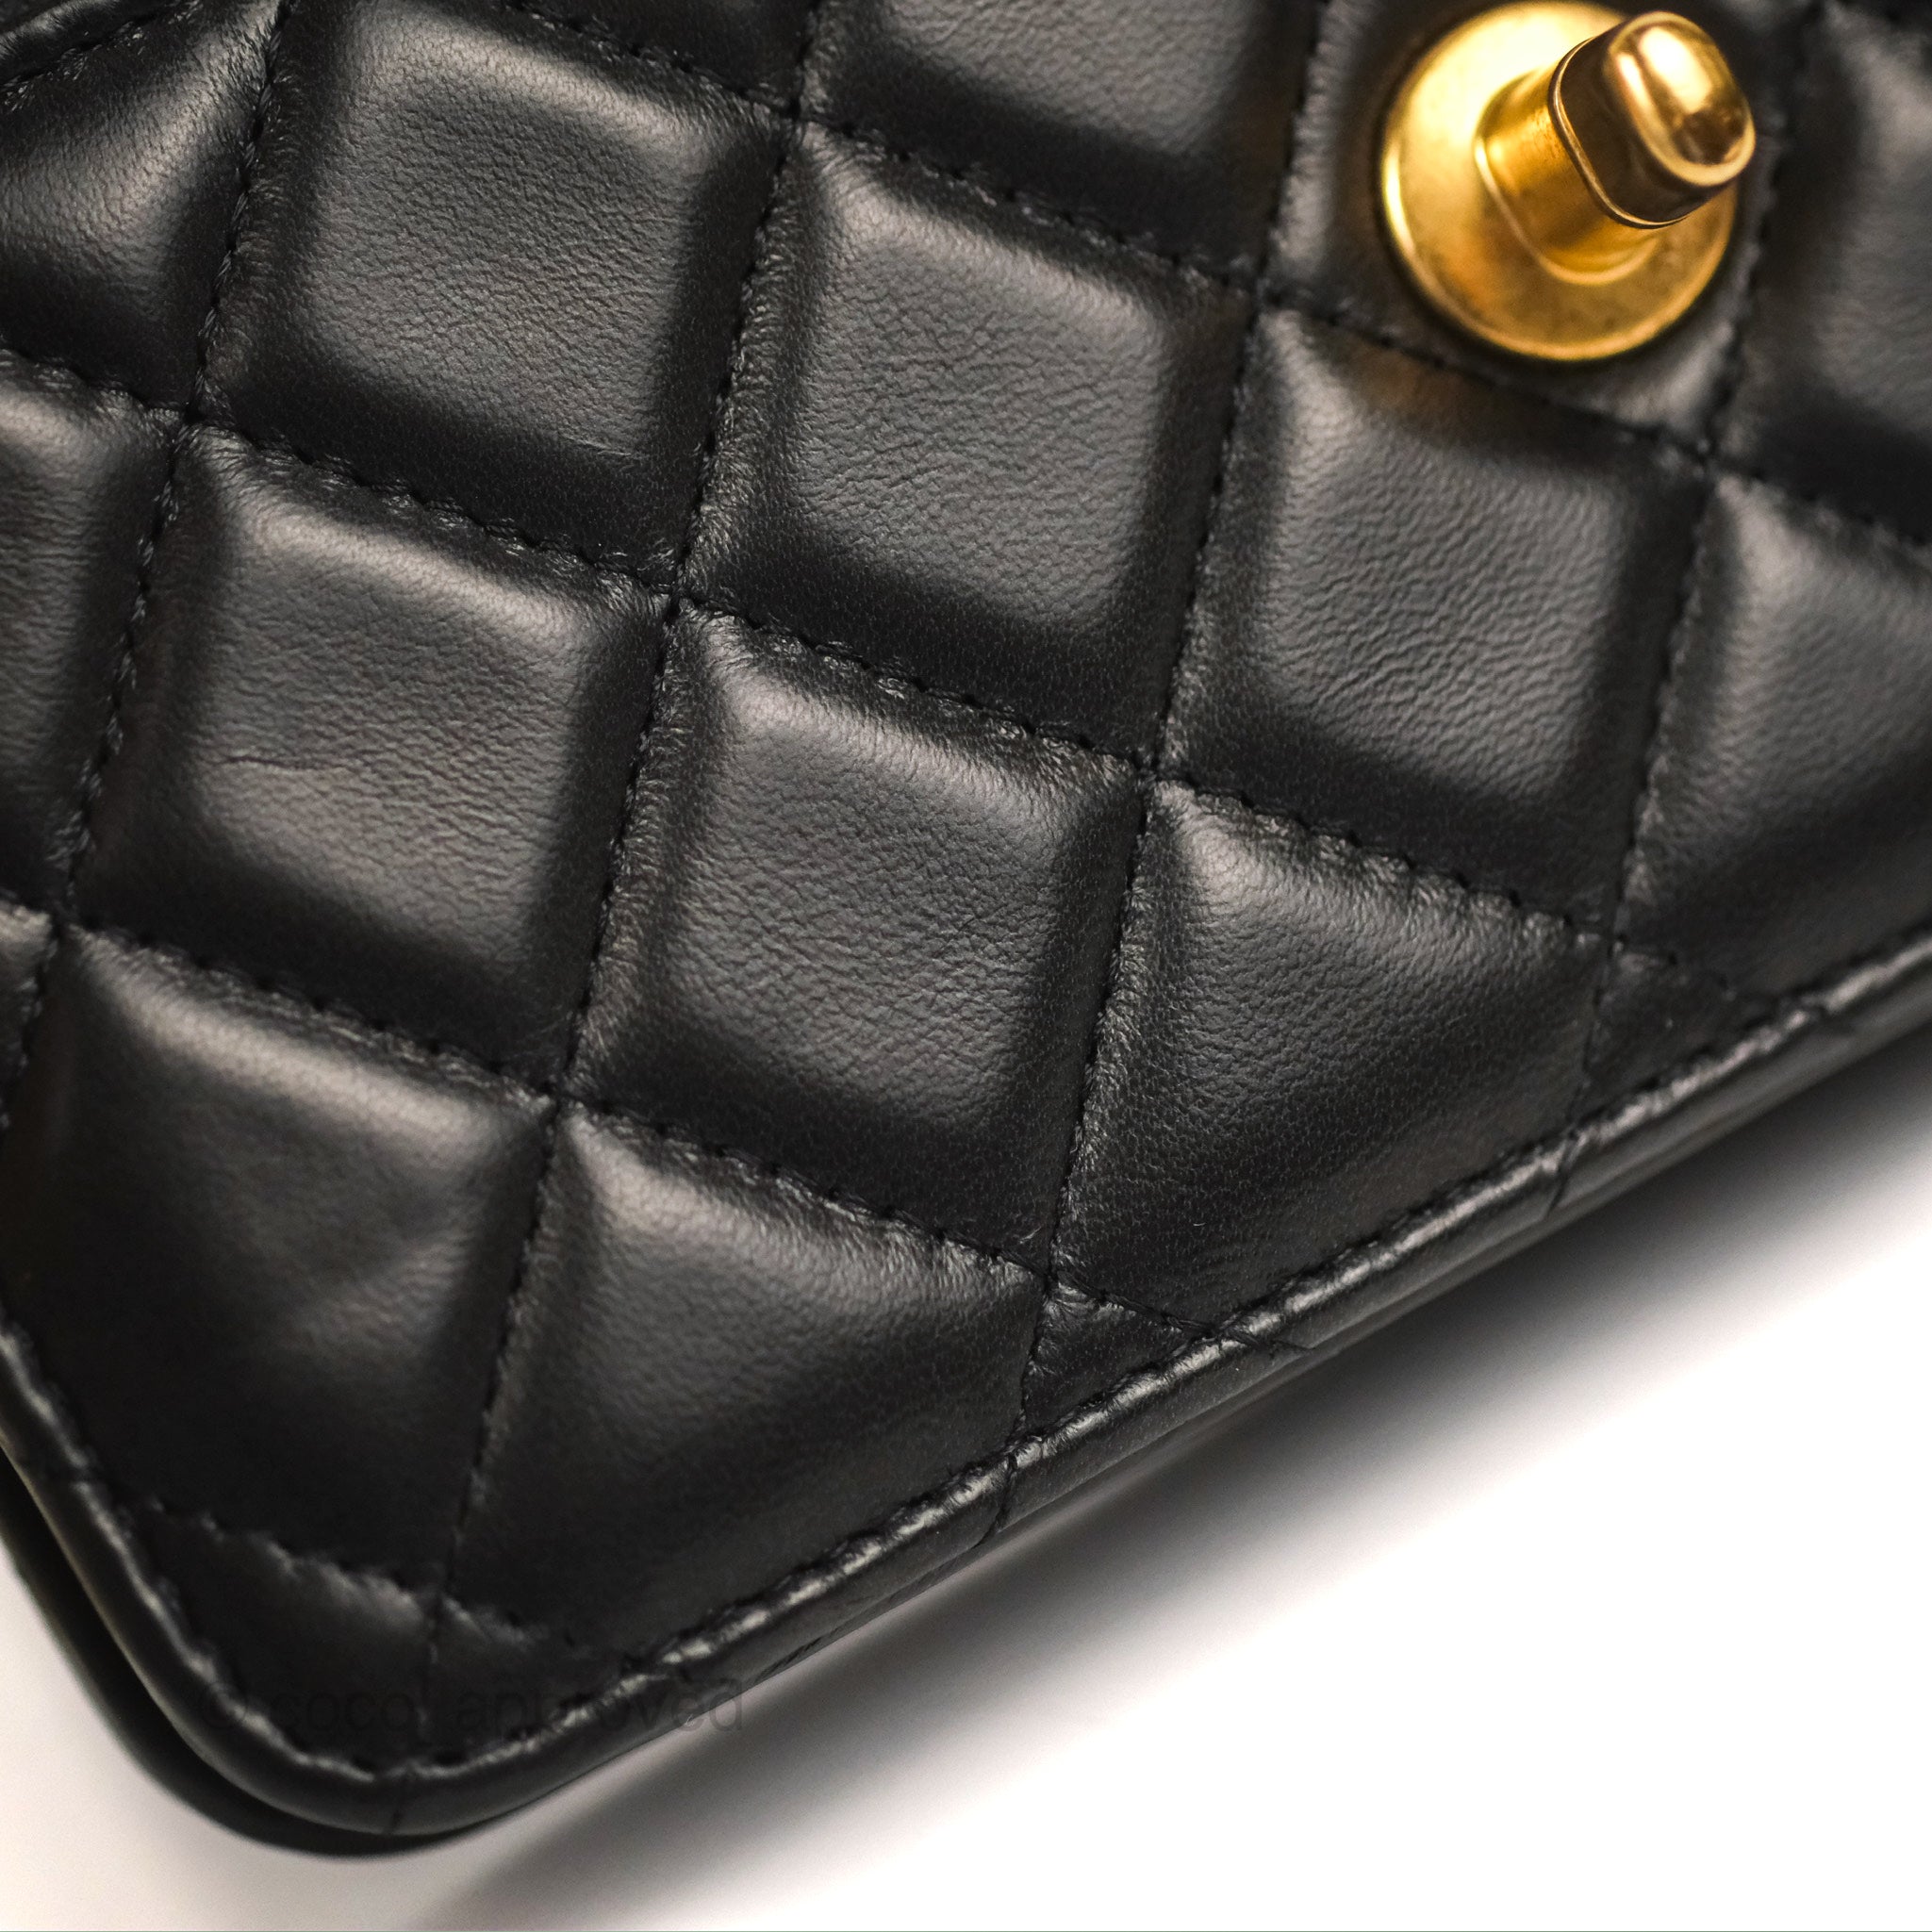 Chanel Quilted Wallet on Chain WOC Adjustable Chain Black Lambskin 22K –  Coco Approved Studio